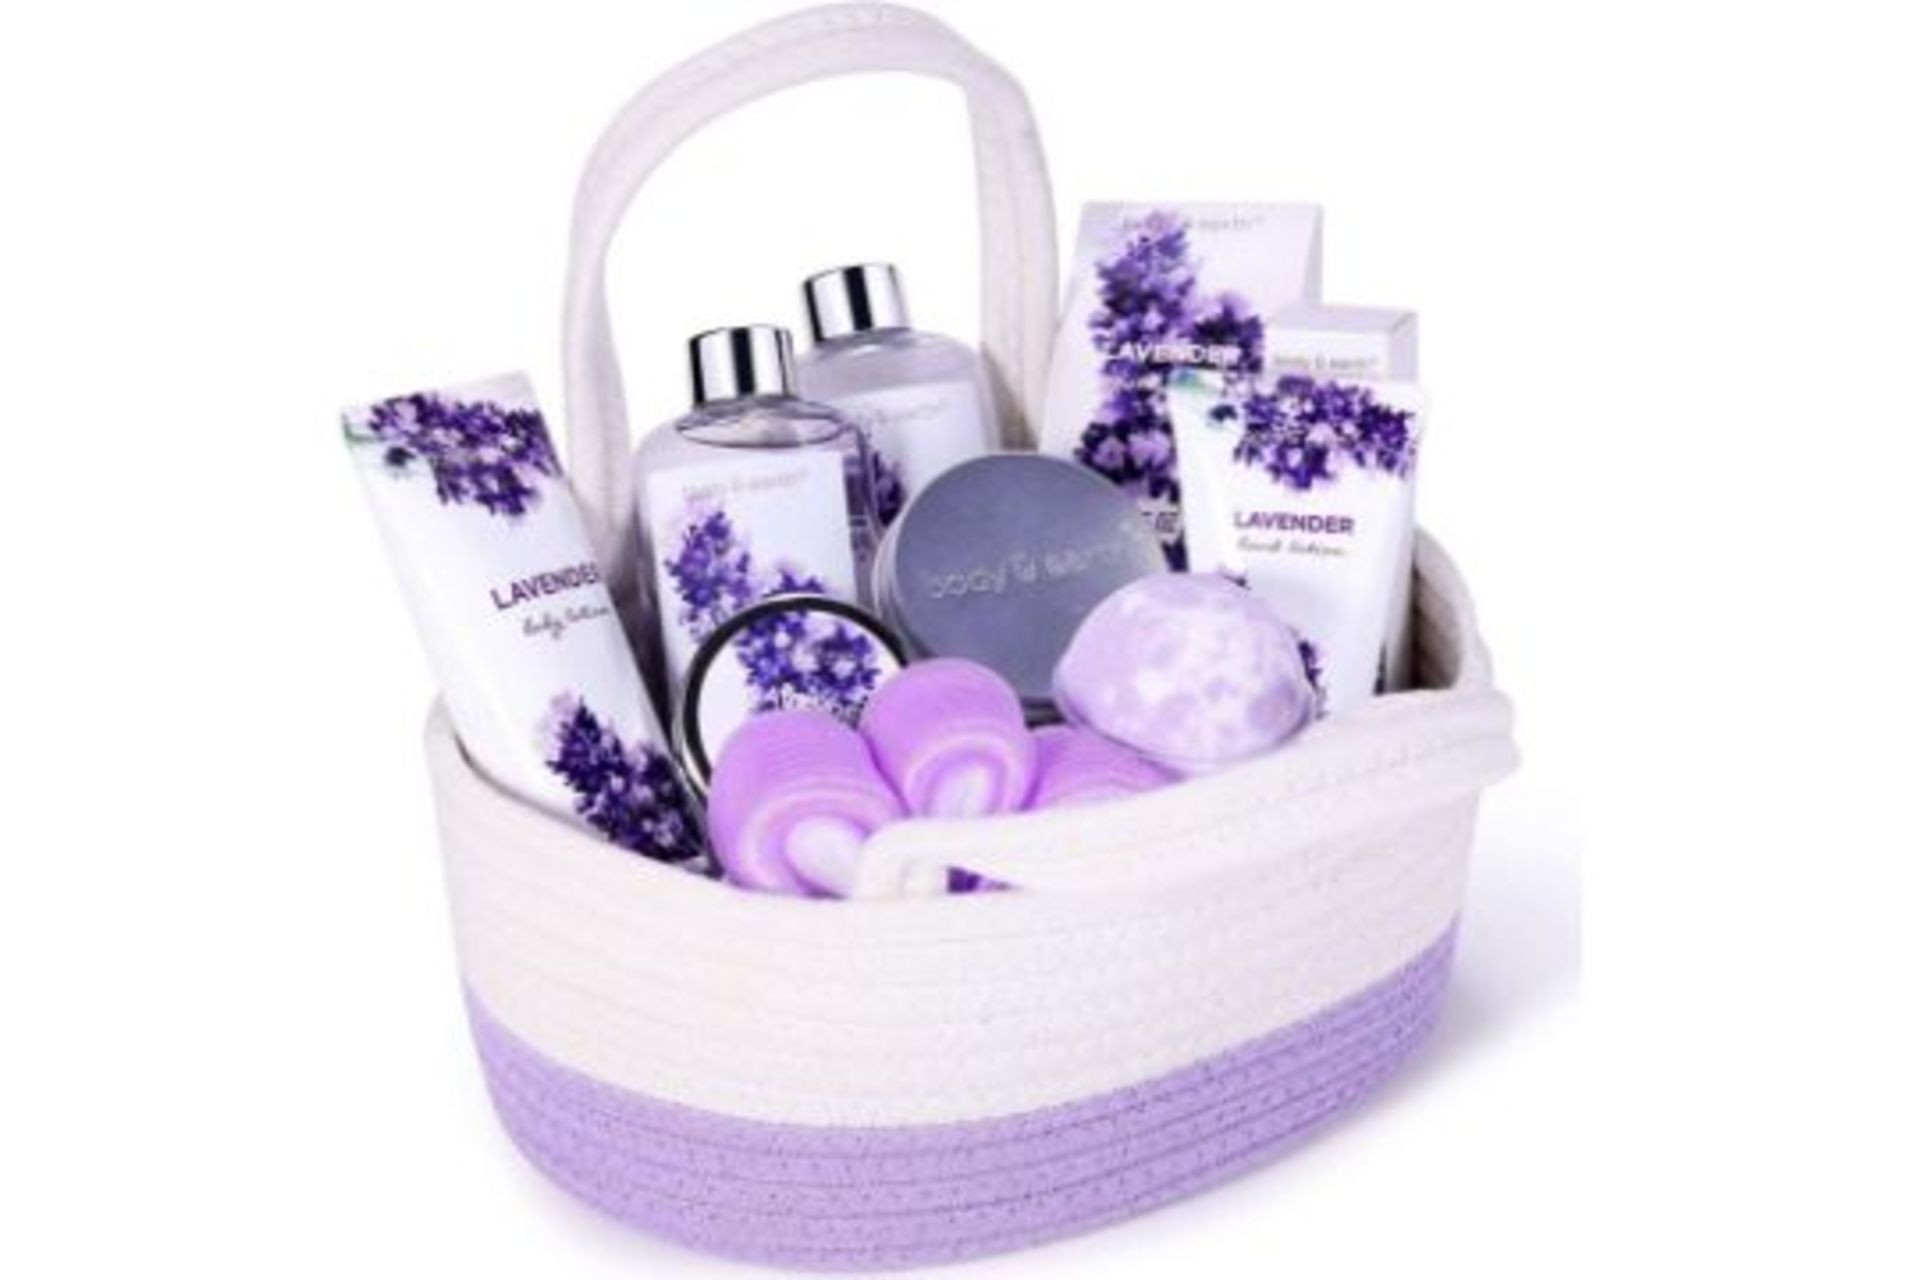 2 X NEW BOXED BODY & EARTH 11 PIECE LAVENDER GIFT BASKETS. BE-BP-10-1. RRP £39.99 EACH. ROW 12 RACK